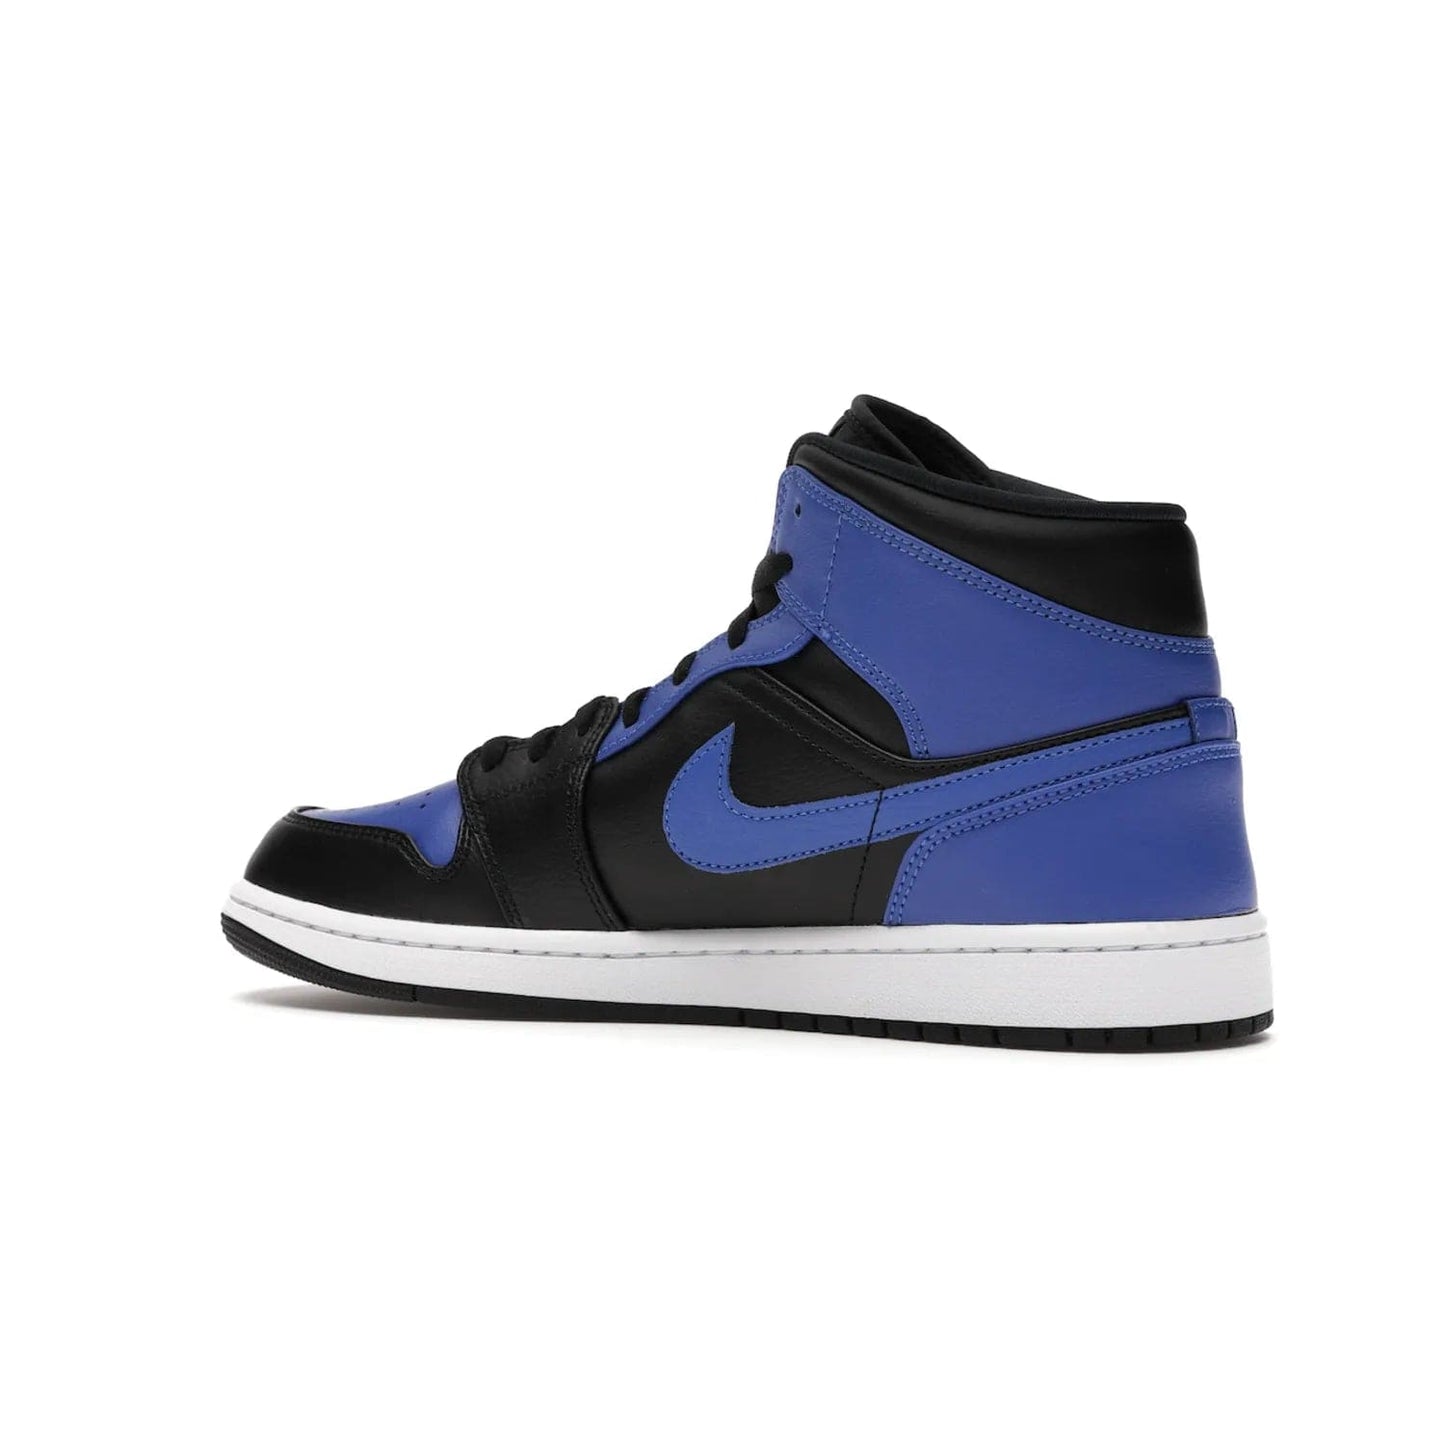 Jordan 1 Mid Hyper Royal Tumbled Leather - Image 22 - Only at www.BallersClubKickz.com - Iconic colorway of the Air Jordan 1 Mid Black Royal Tumbled Leather. Features a black tumbled leather upper, royal blue leather overlays, white midsole & black rubber outsole. Released December 2020. Adds premium style to any collection.